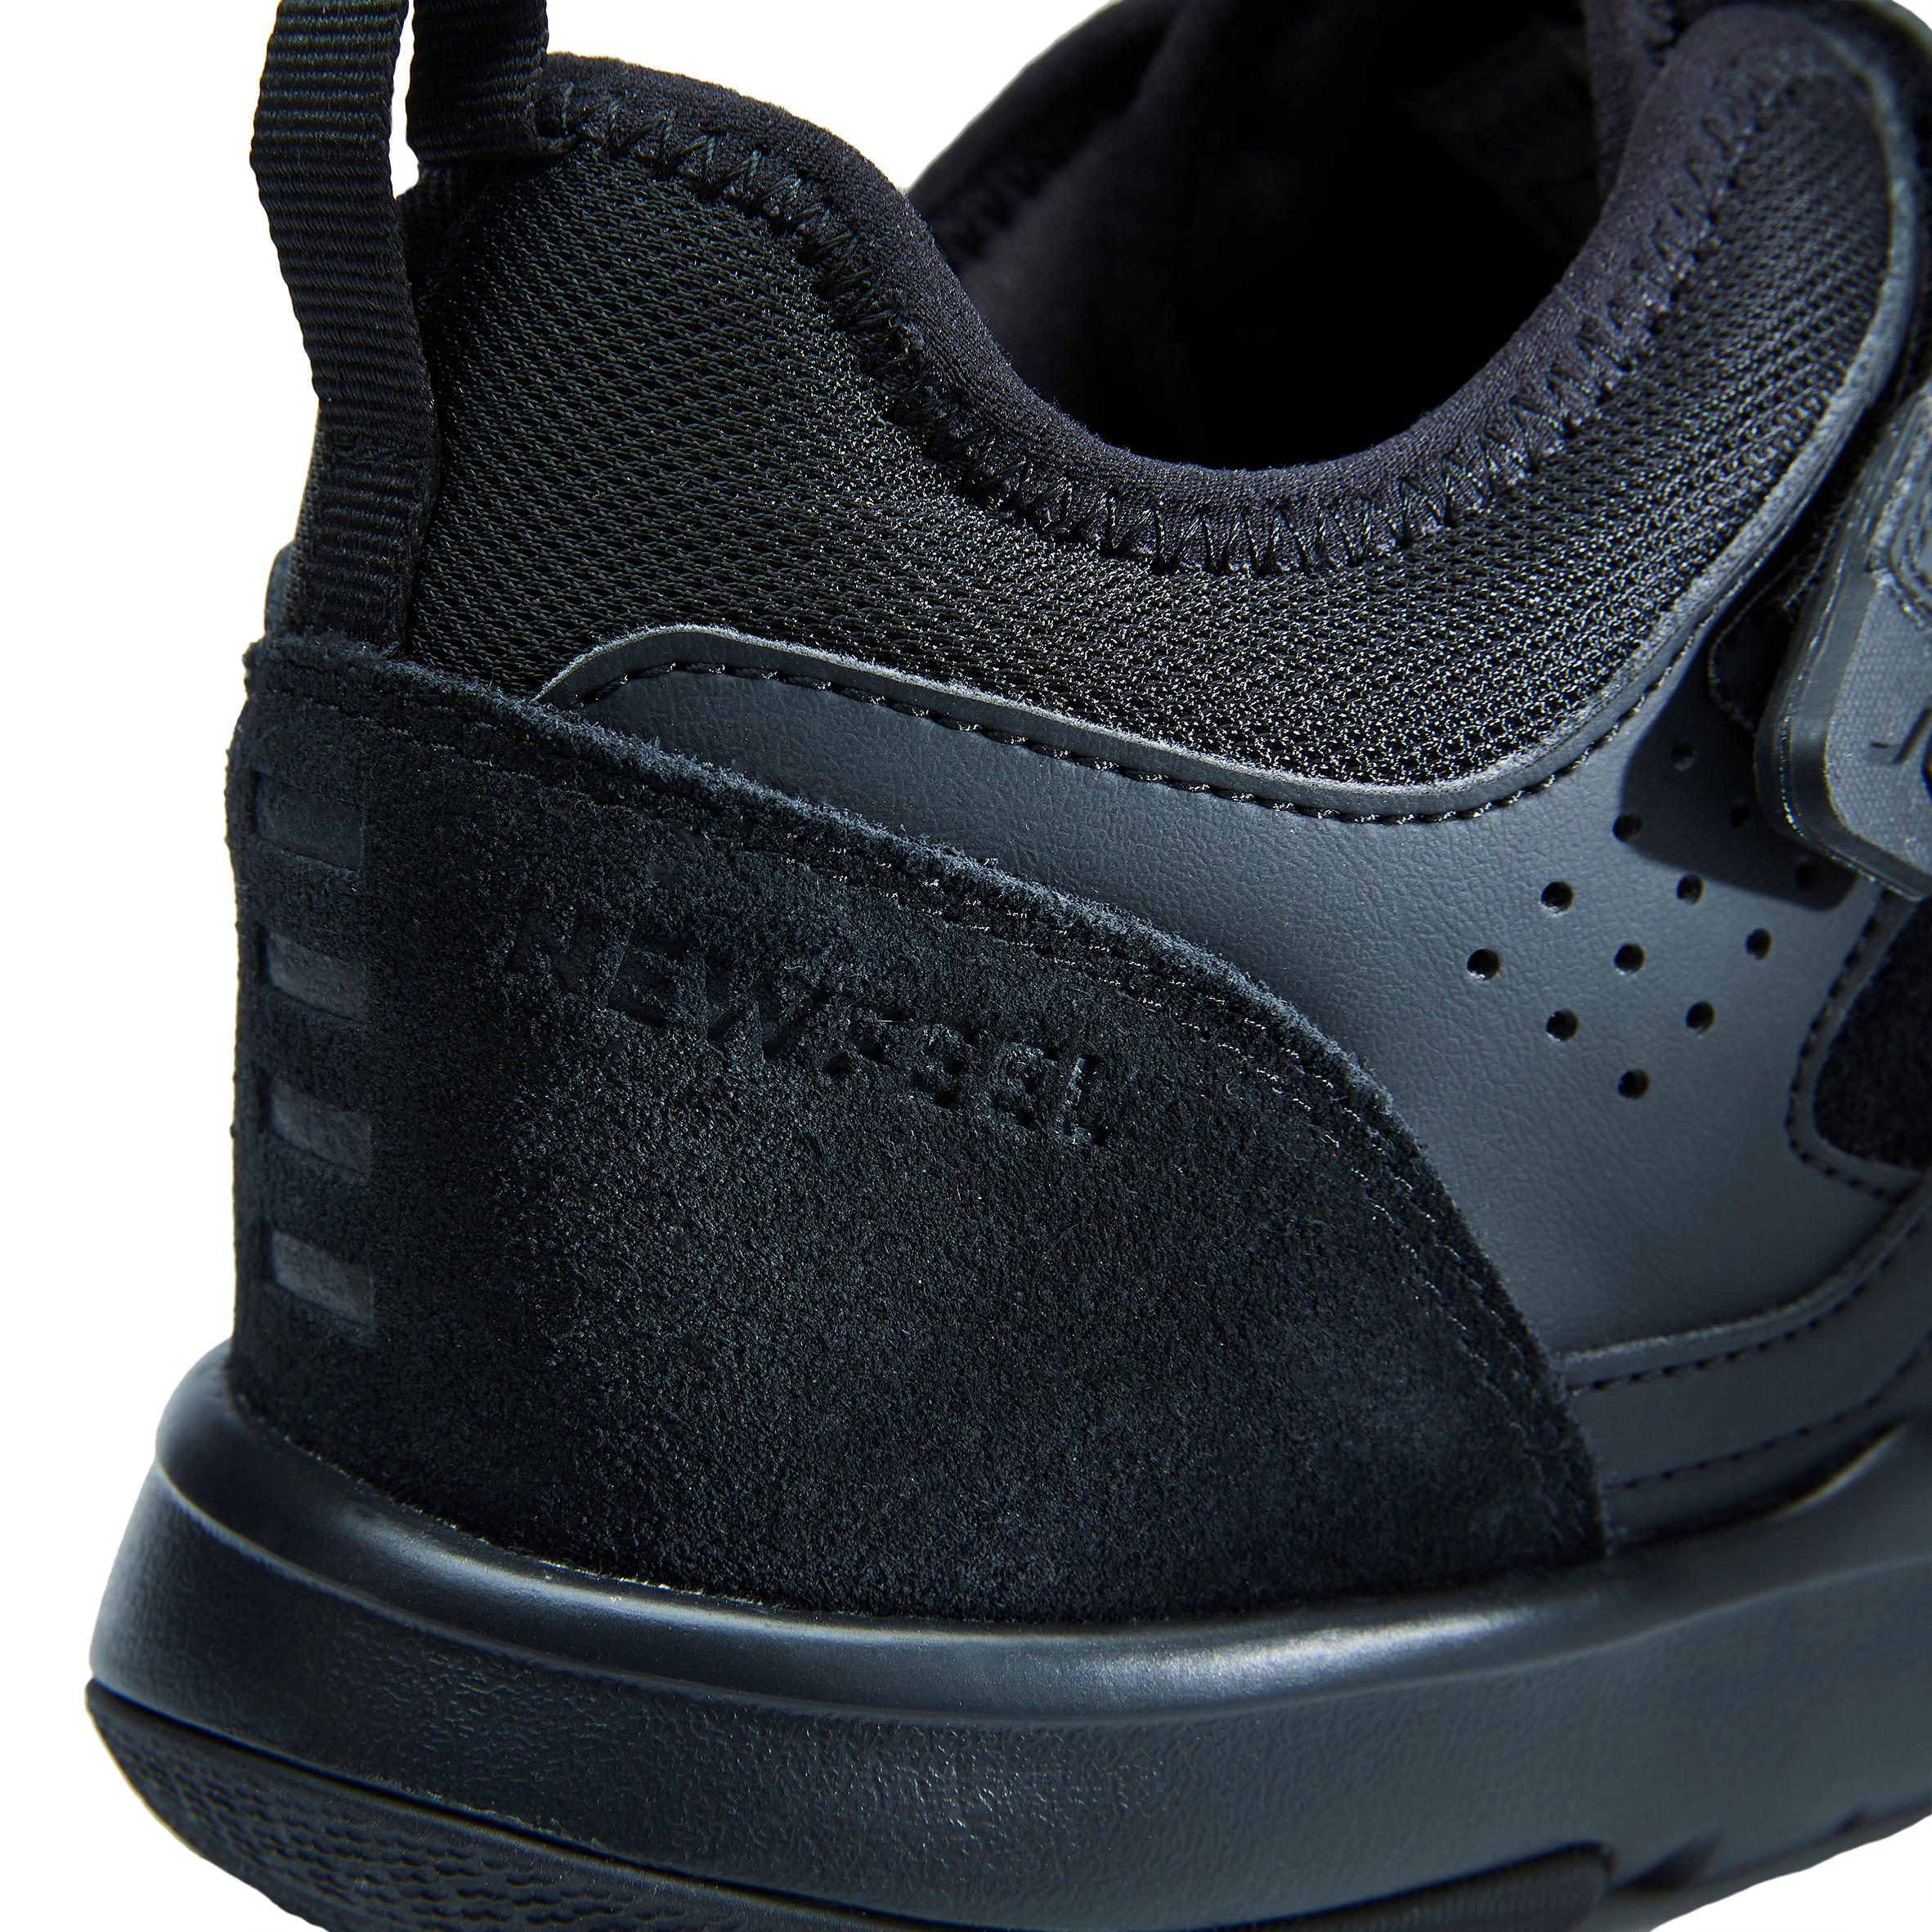 all black leather walking shoes